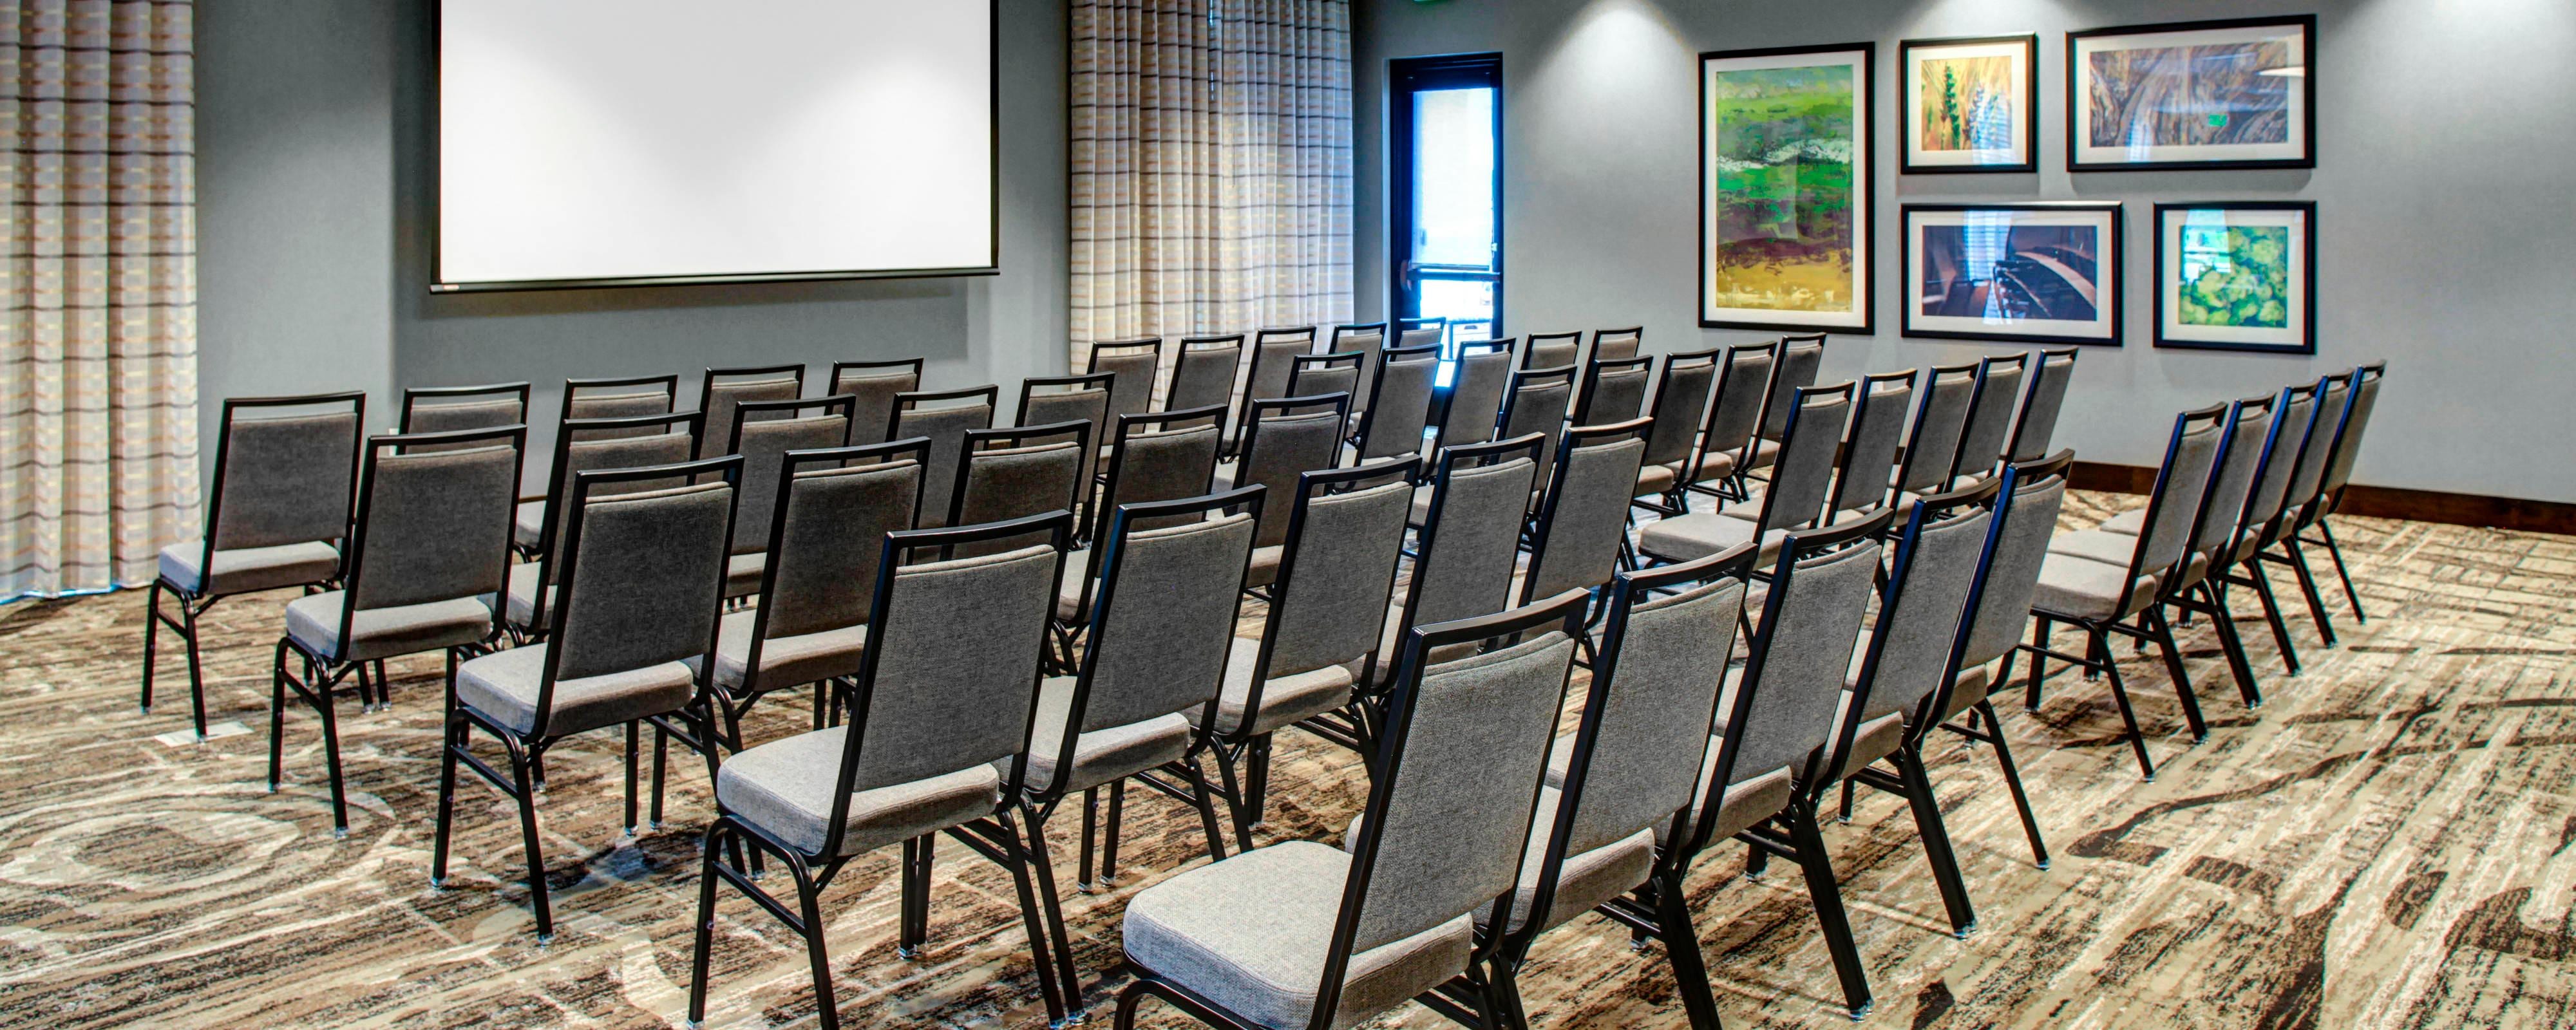 Meeting Space Event Rooms our Bozeman Hotel SpringHill Suites Bozeman